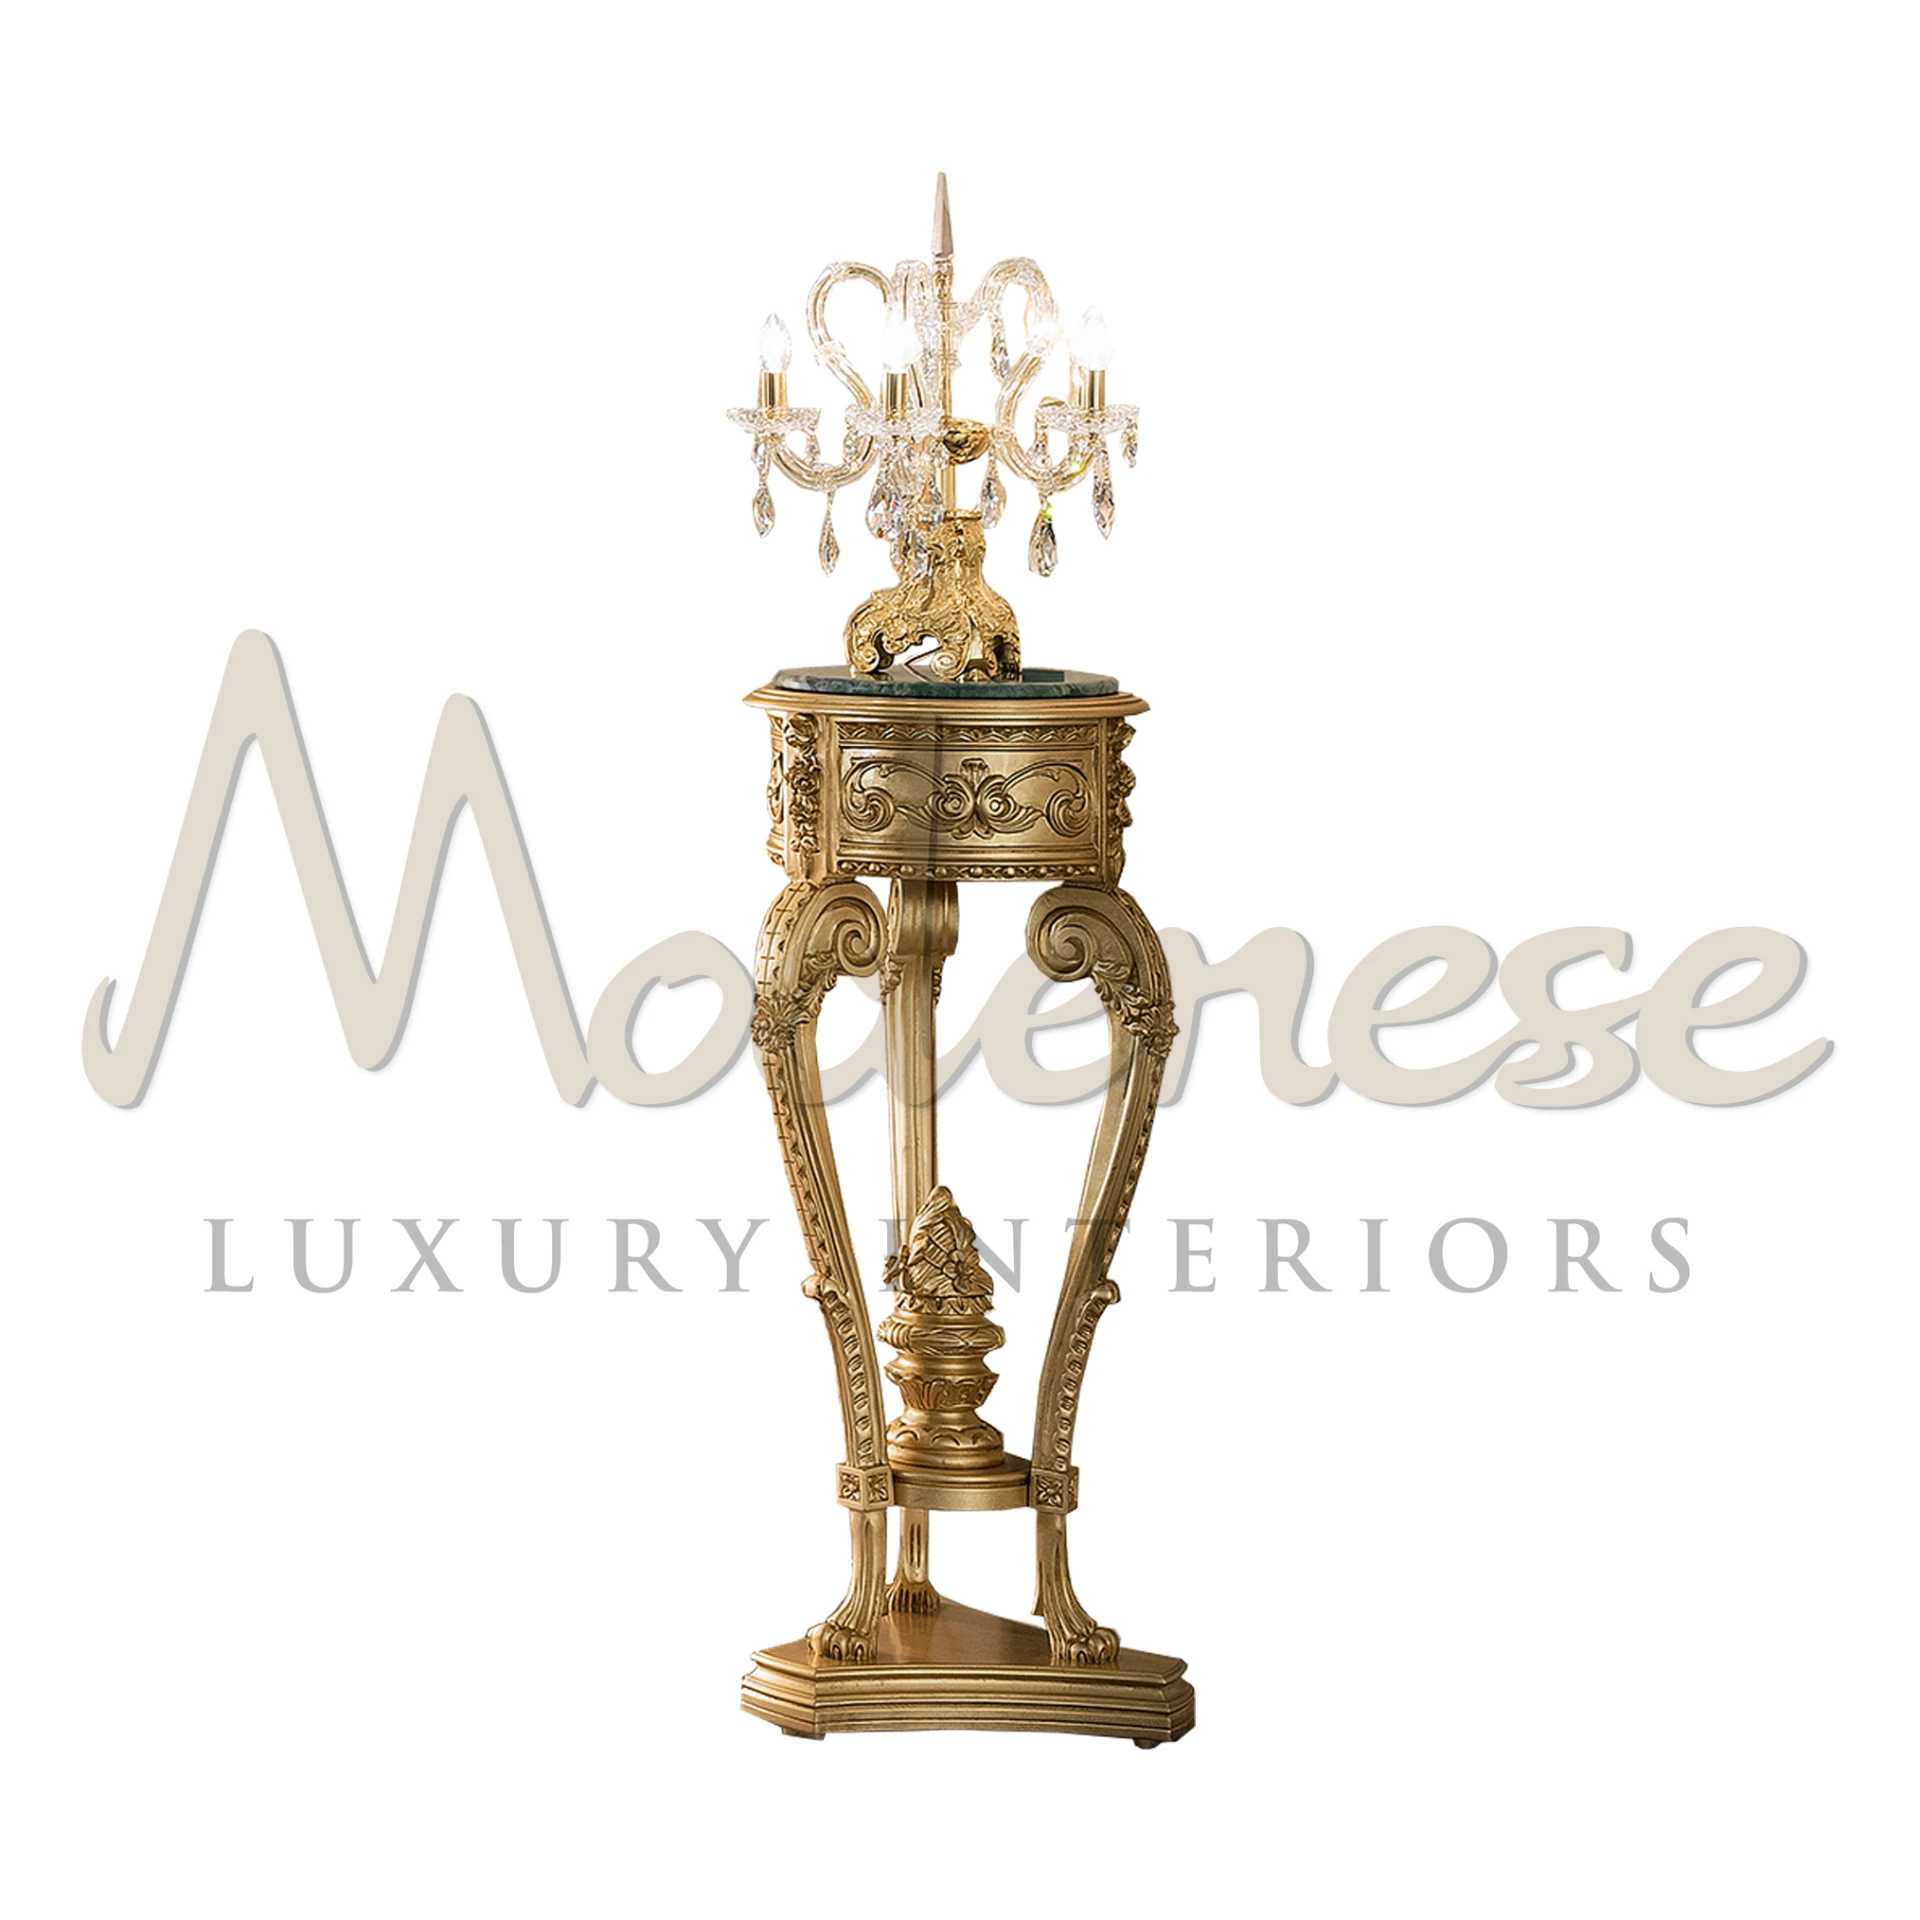 Luxurious Column Vase Stand by Modenese Furniture with Italian Craftsmanship